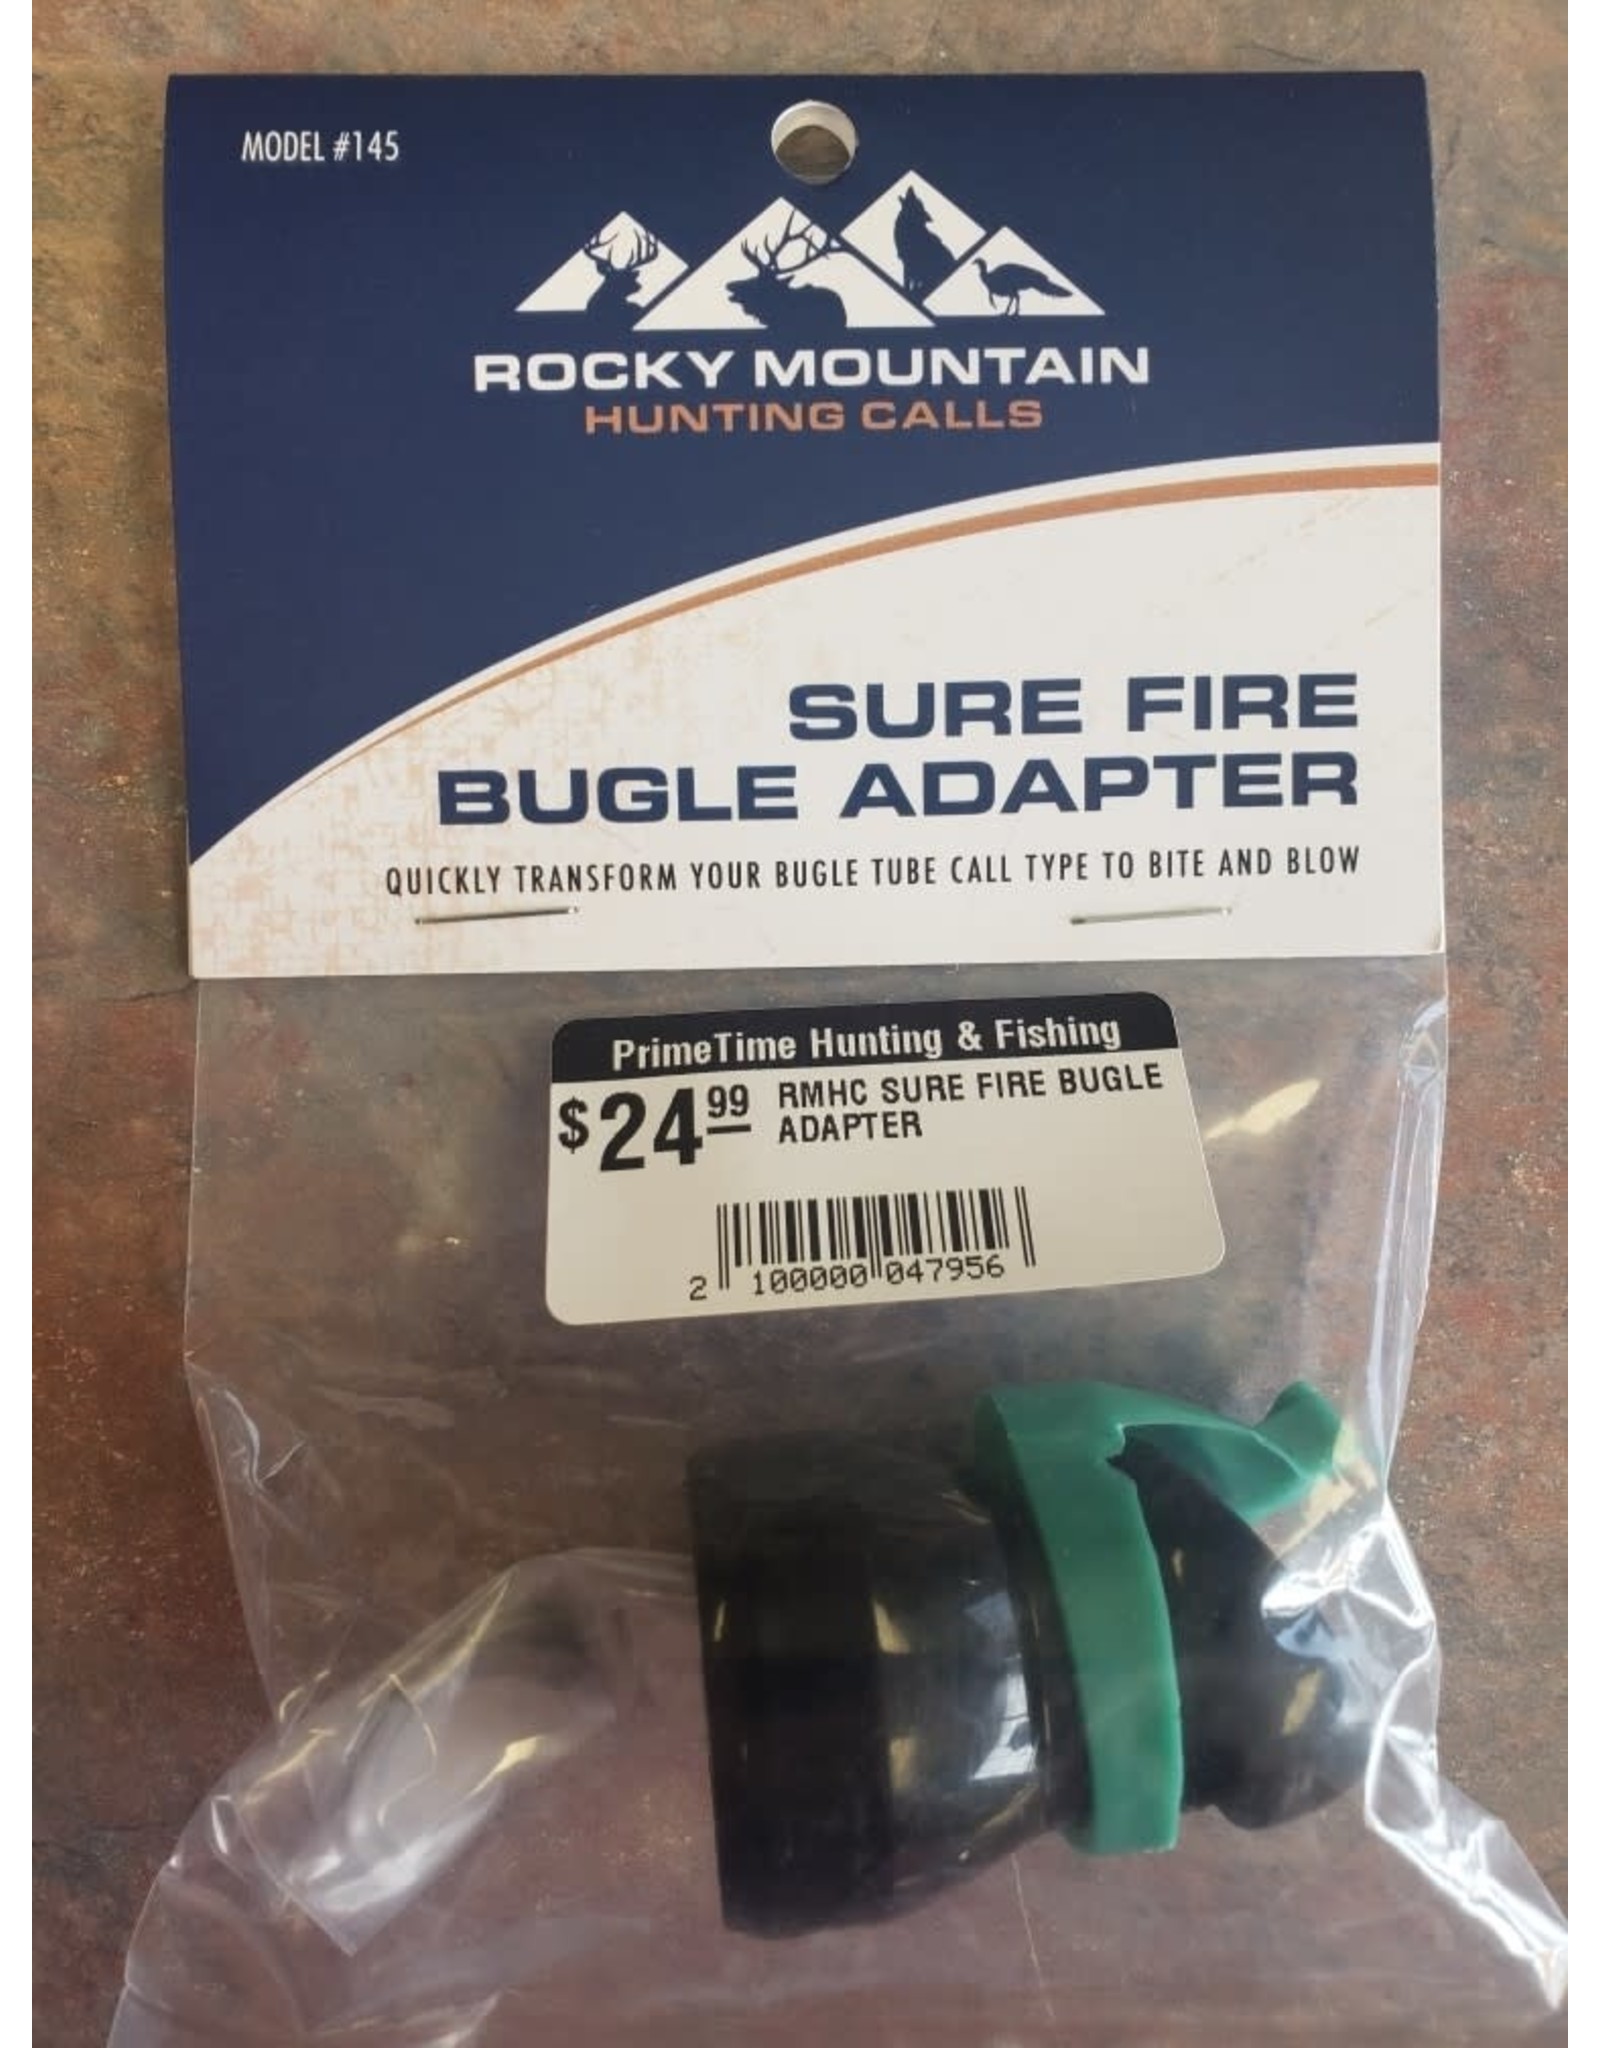 ROCKY MOUNTAIN HUNTING CALLS RMHC SURE FIRE BUGLE ADAPTER - Prime